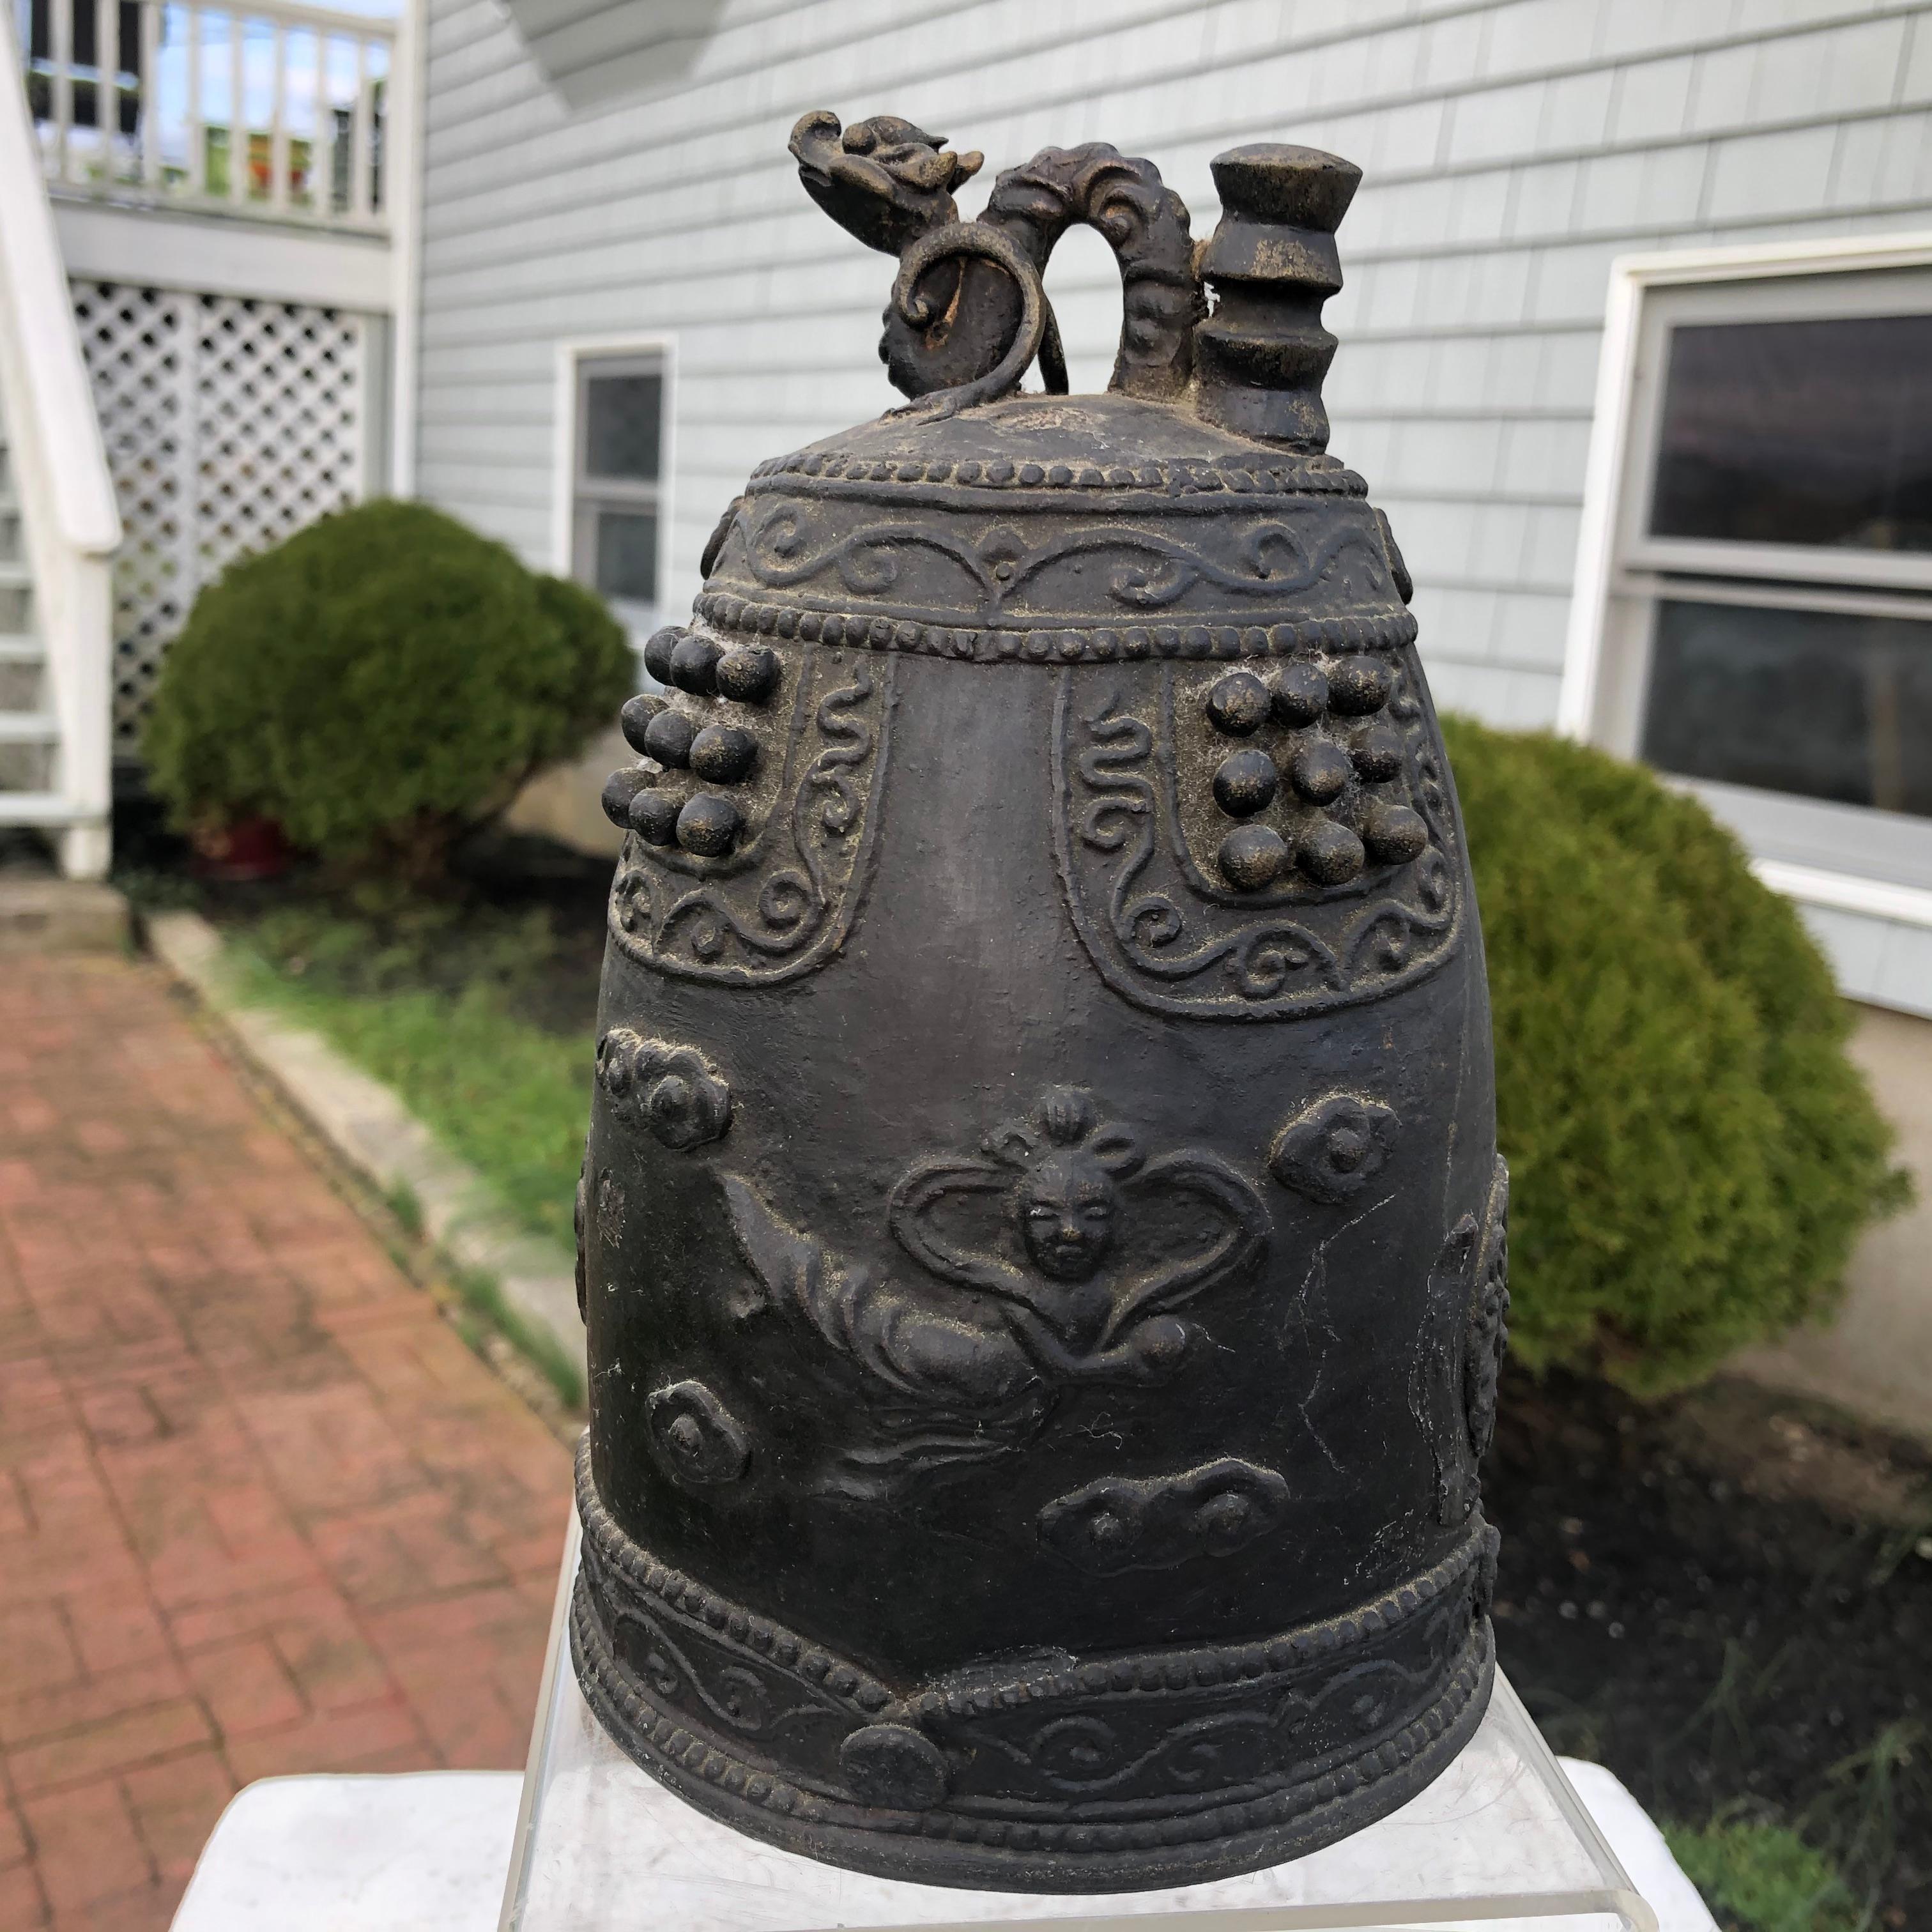 Flying angels and dragon motif

Here's a rare treasure from Japan and an unusual find- plus an excellent candidate to accent your indoor or outdoor garden space. 

This is an unusual antique bronze cast temple bell complete featuring unusual